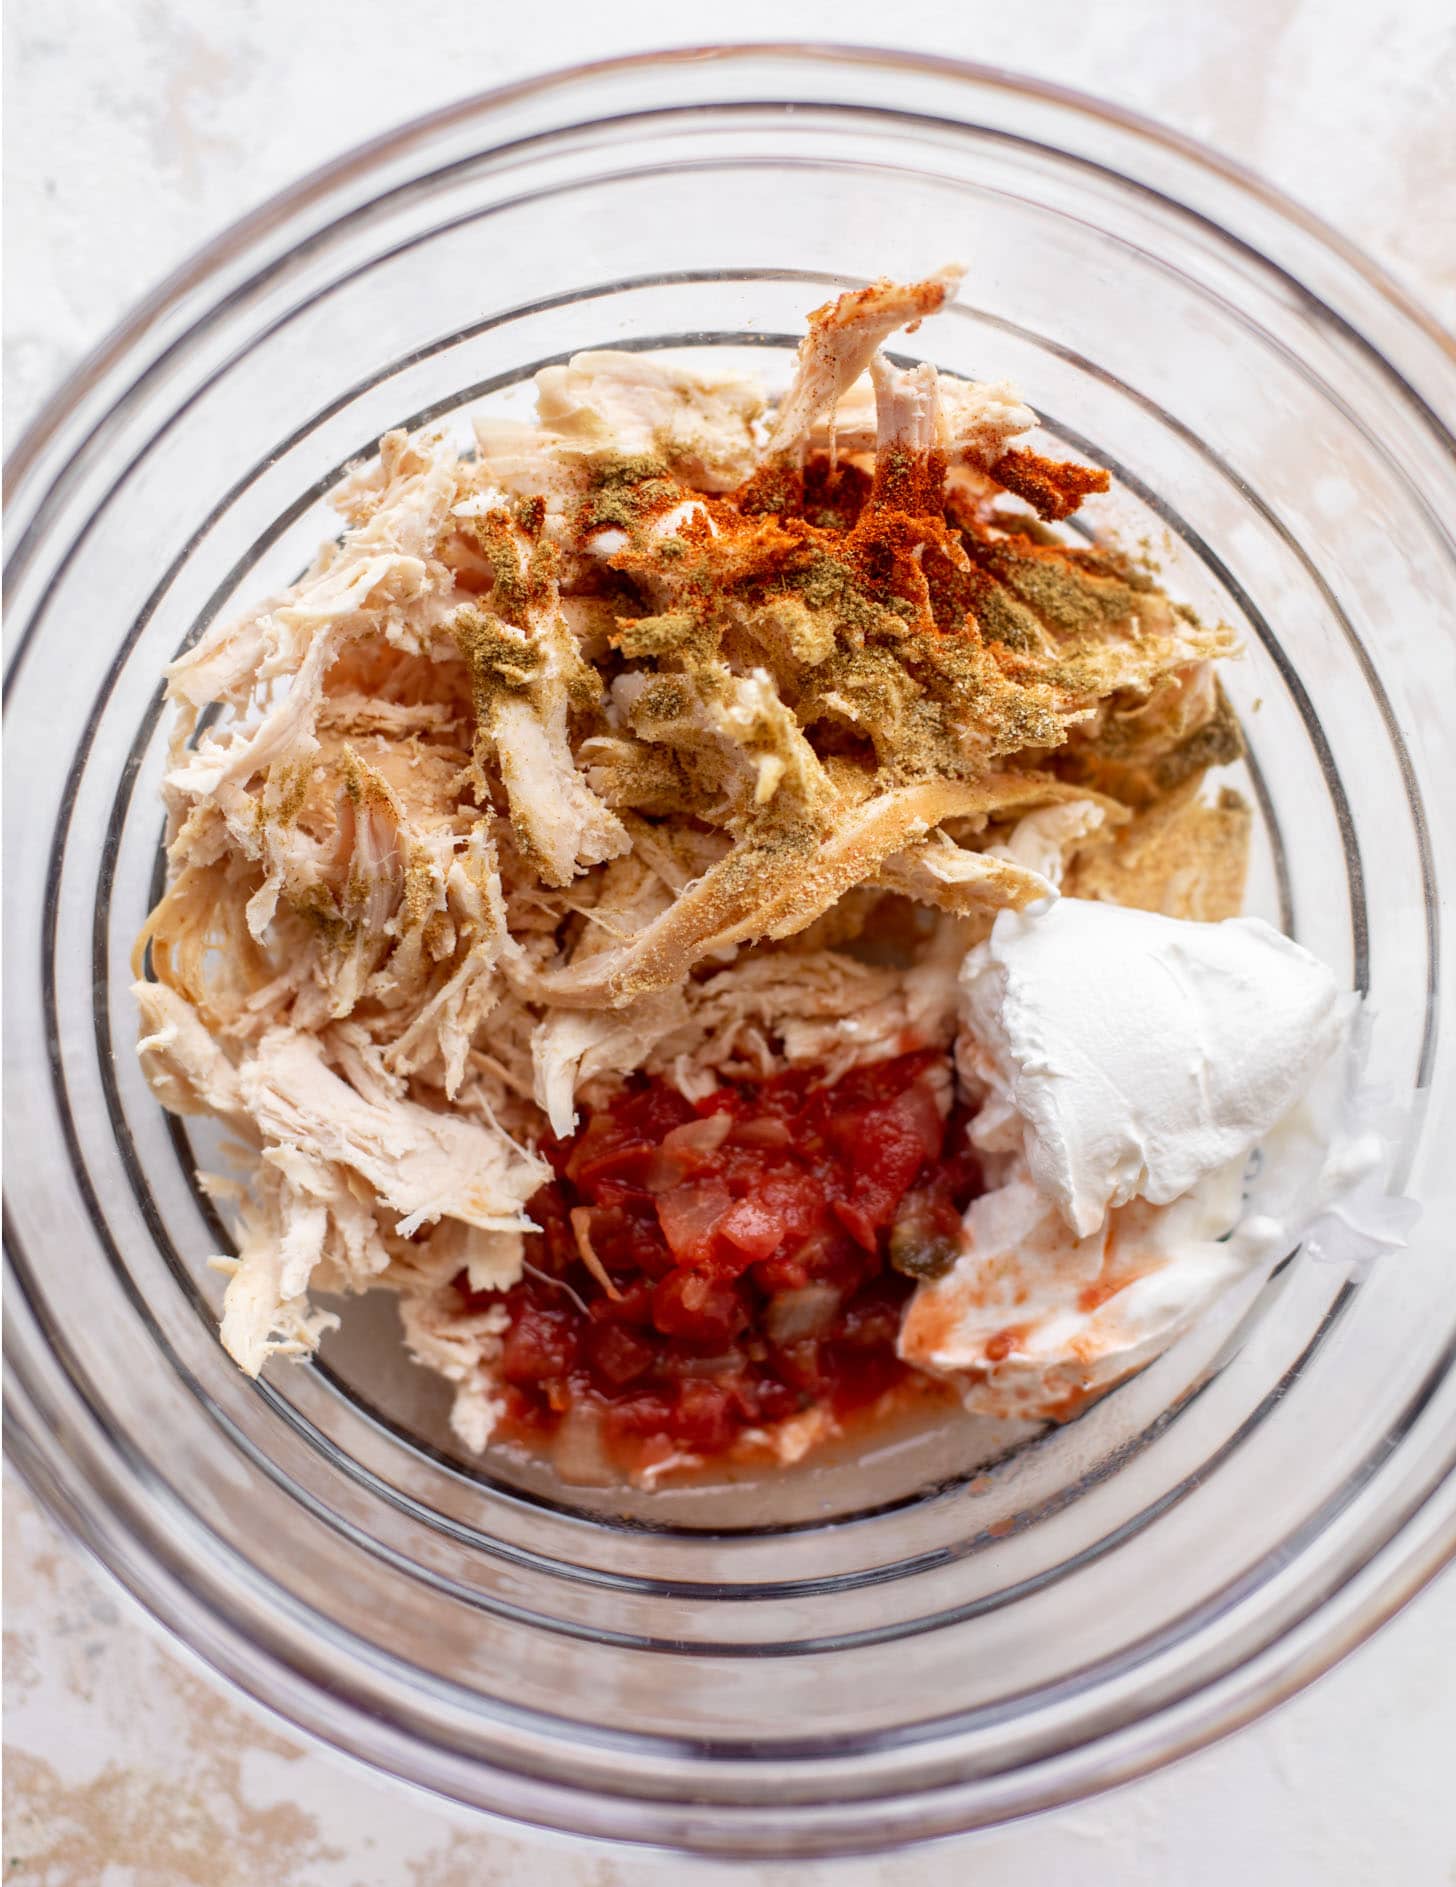 shredded chicken with salsa, spices, sour cream